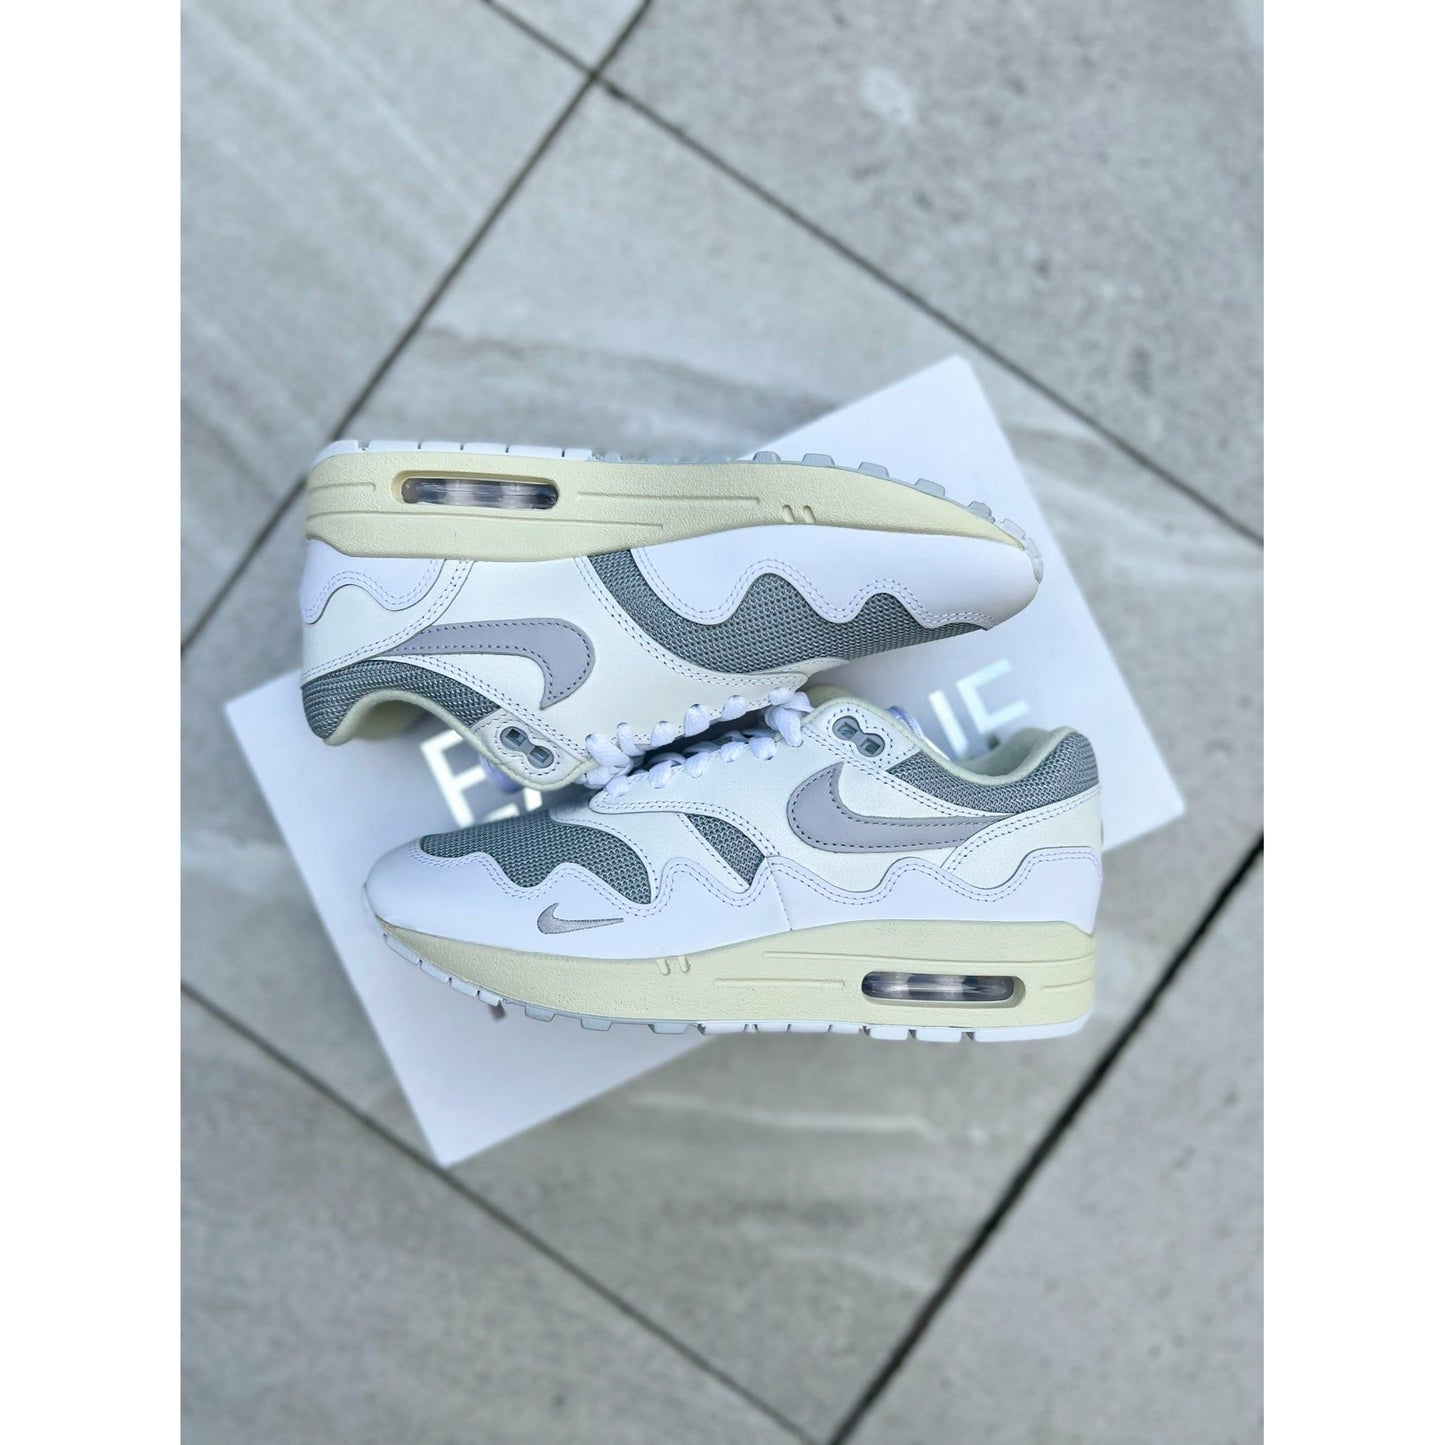 Nike Air Max 1 Patta Waves White by Nike from £300.00